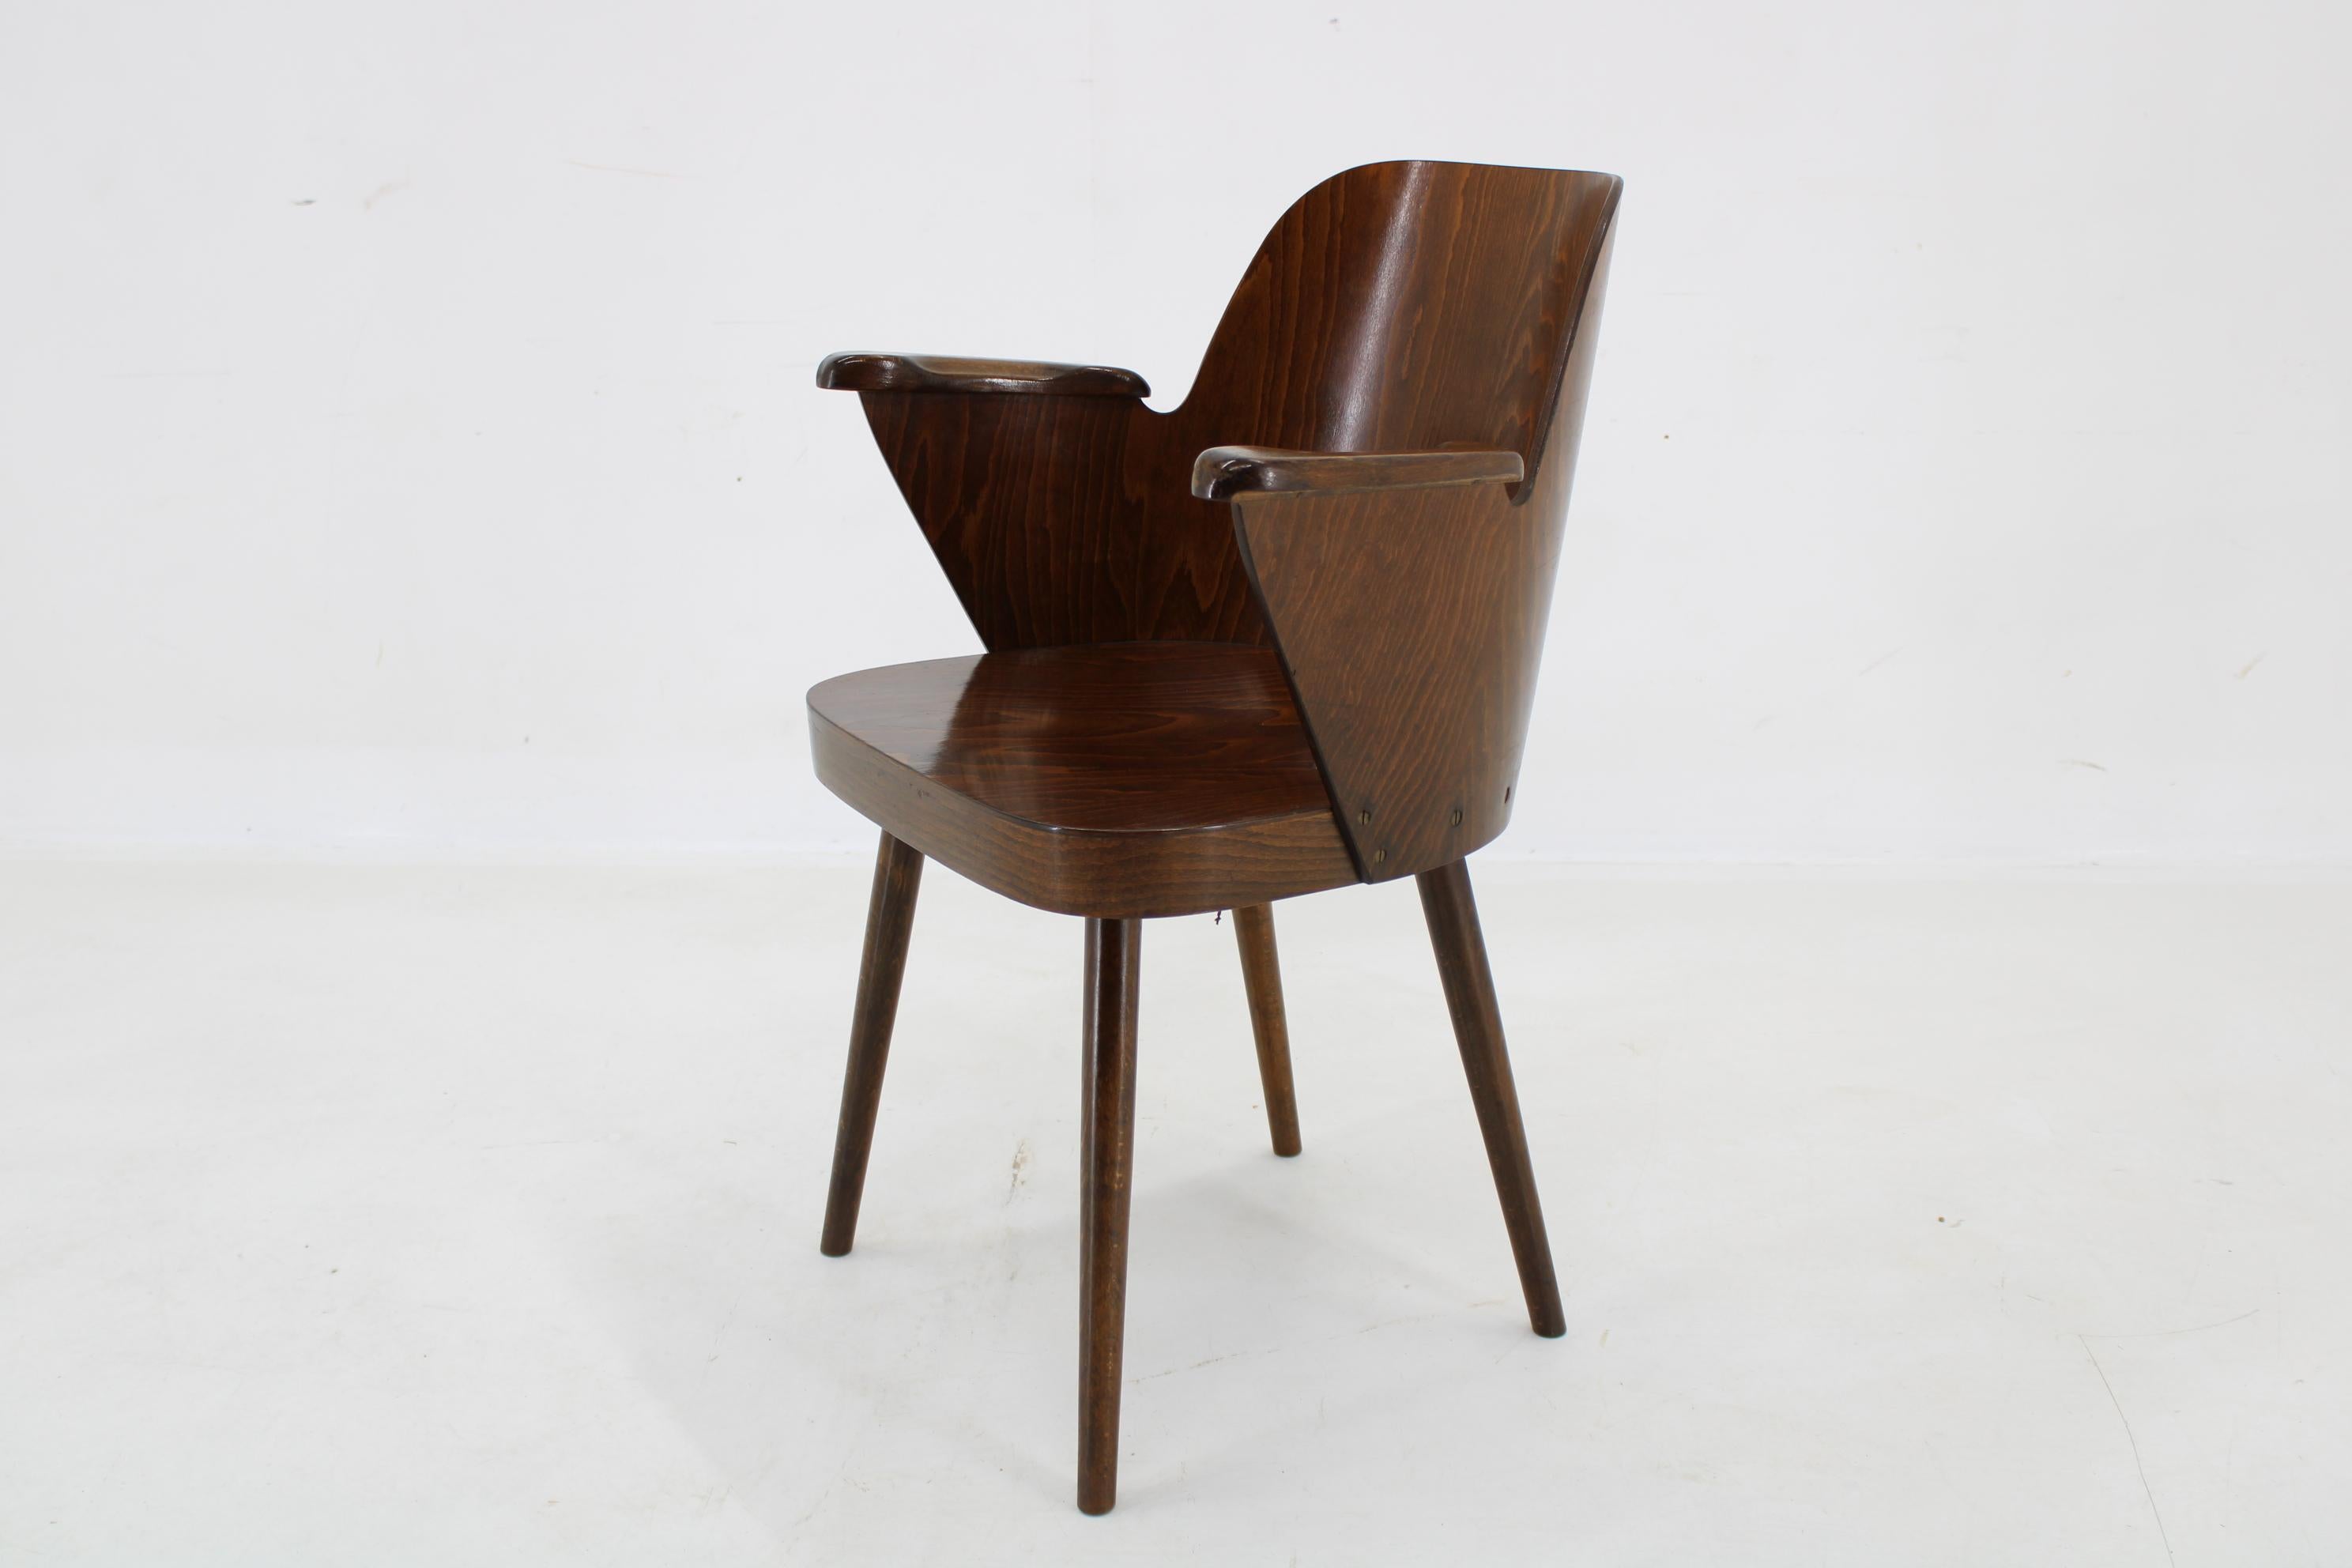 - Made of stained beech wood and beech plywood 
- The wooden parts have been repolished
- Armrests 64